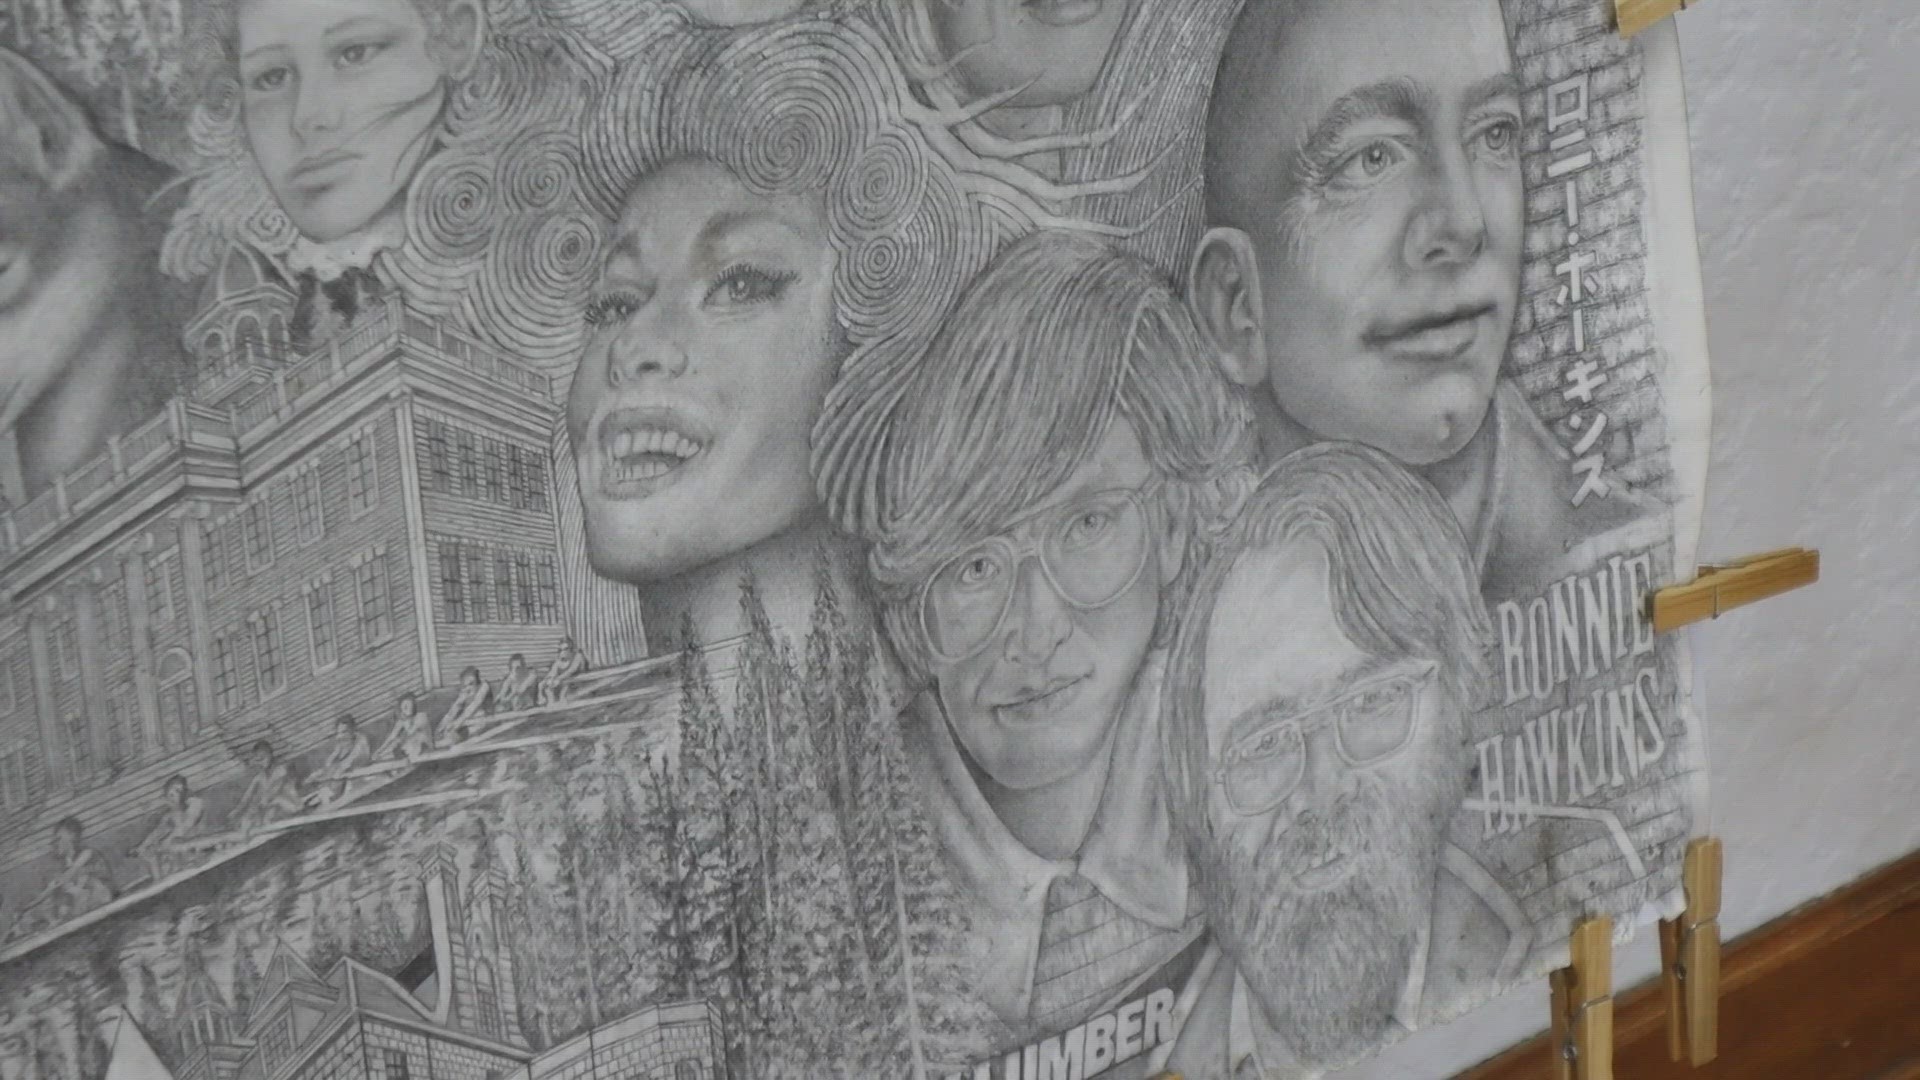 The piece features famous figures, businesses and locations. It took the artist approximately six years to finish the mural.